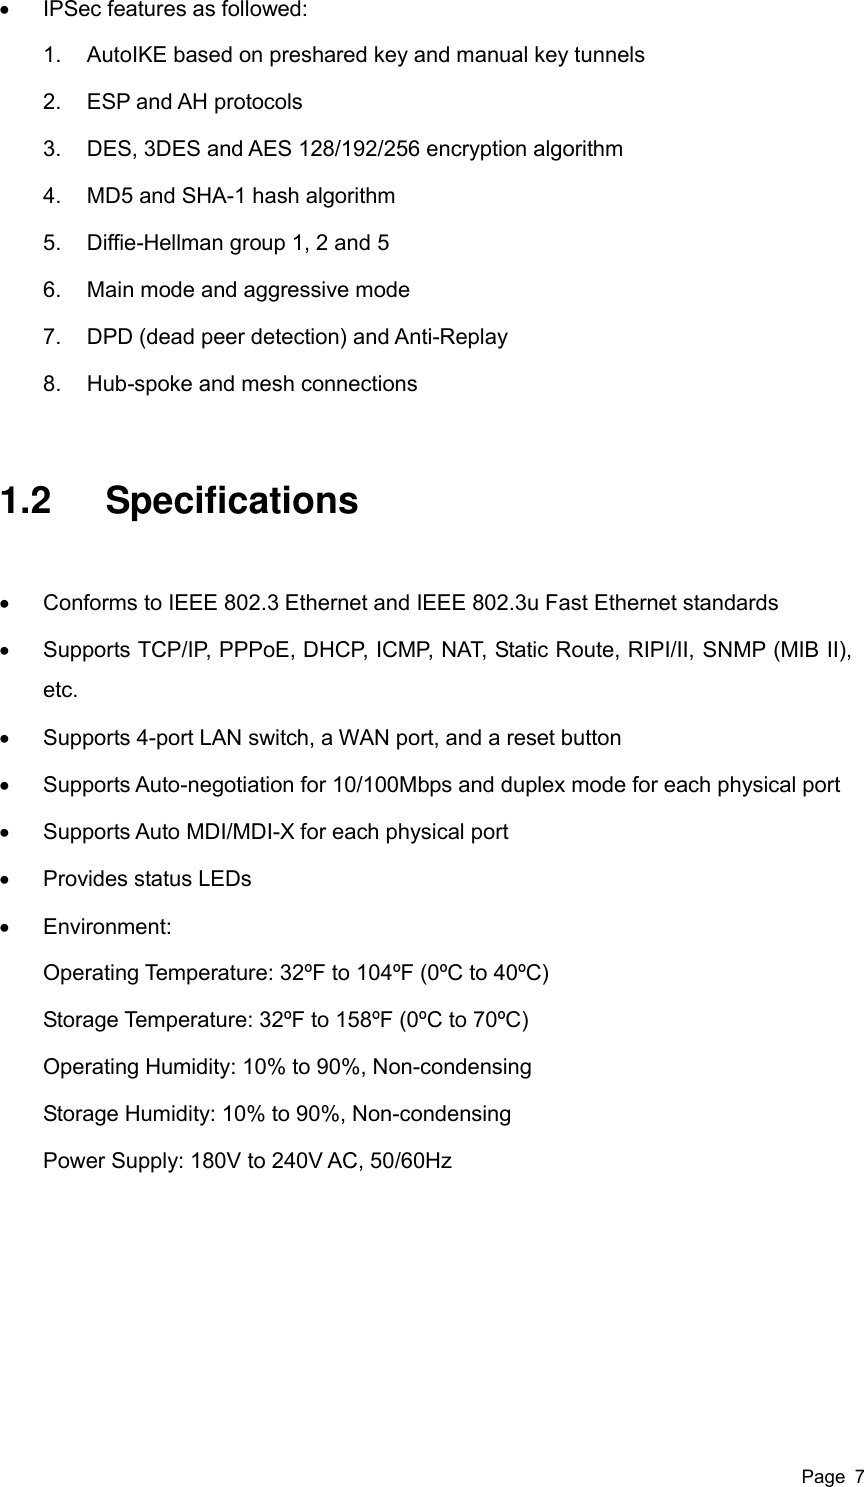  Page  7   IPSec features as followed: 1.  AutoIKE based on preshared key and manual key tunnels 2.  ESP and AH protocols 3.  DES, 3DES and AES 128/192/256 encryption algorithm 4.  MD5 and SHA-1 hash algorithm 5.  Diffie-Hellman group 1, 2 and 5 6.  Main mode and aggressive mode 7.  DPD (dead peer detection) and Anti-Replay 8.  Hub-spoke and mesh connections 1.2  Specifications   Conforms to IEEE 802.3 Ethernet and IEEE 802.3u Fast Ethernet standards   Supports TCP/IP, PPPoE, DHCP, ICMP, NAT, Static Route, RIPI/II, SNMP (MIB II), etc.   Supports 4-port LAN switch, a WAN port, and a reset button   Supports Auto-negotiation for 10/100Mbps and duplex mode for each physical port   Supports Auto MDI/MDI-X for each physical port     Provides status LEDs   Environment:   Operating Temperature: 32ºF to 104ºF (0ºC to 40ºC) Storage Temperature: 32ºF to 158ºF (0ºC to 70ºC) Operating Humidity: 10% to 90%, Non-condensing Storage Humidity: 10% to 90%, Non-condensing Power Supply: 180V to 240V AC, 50/60Hz 